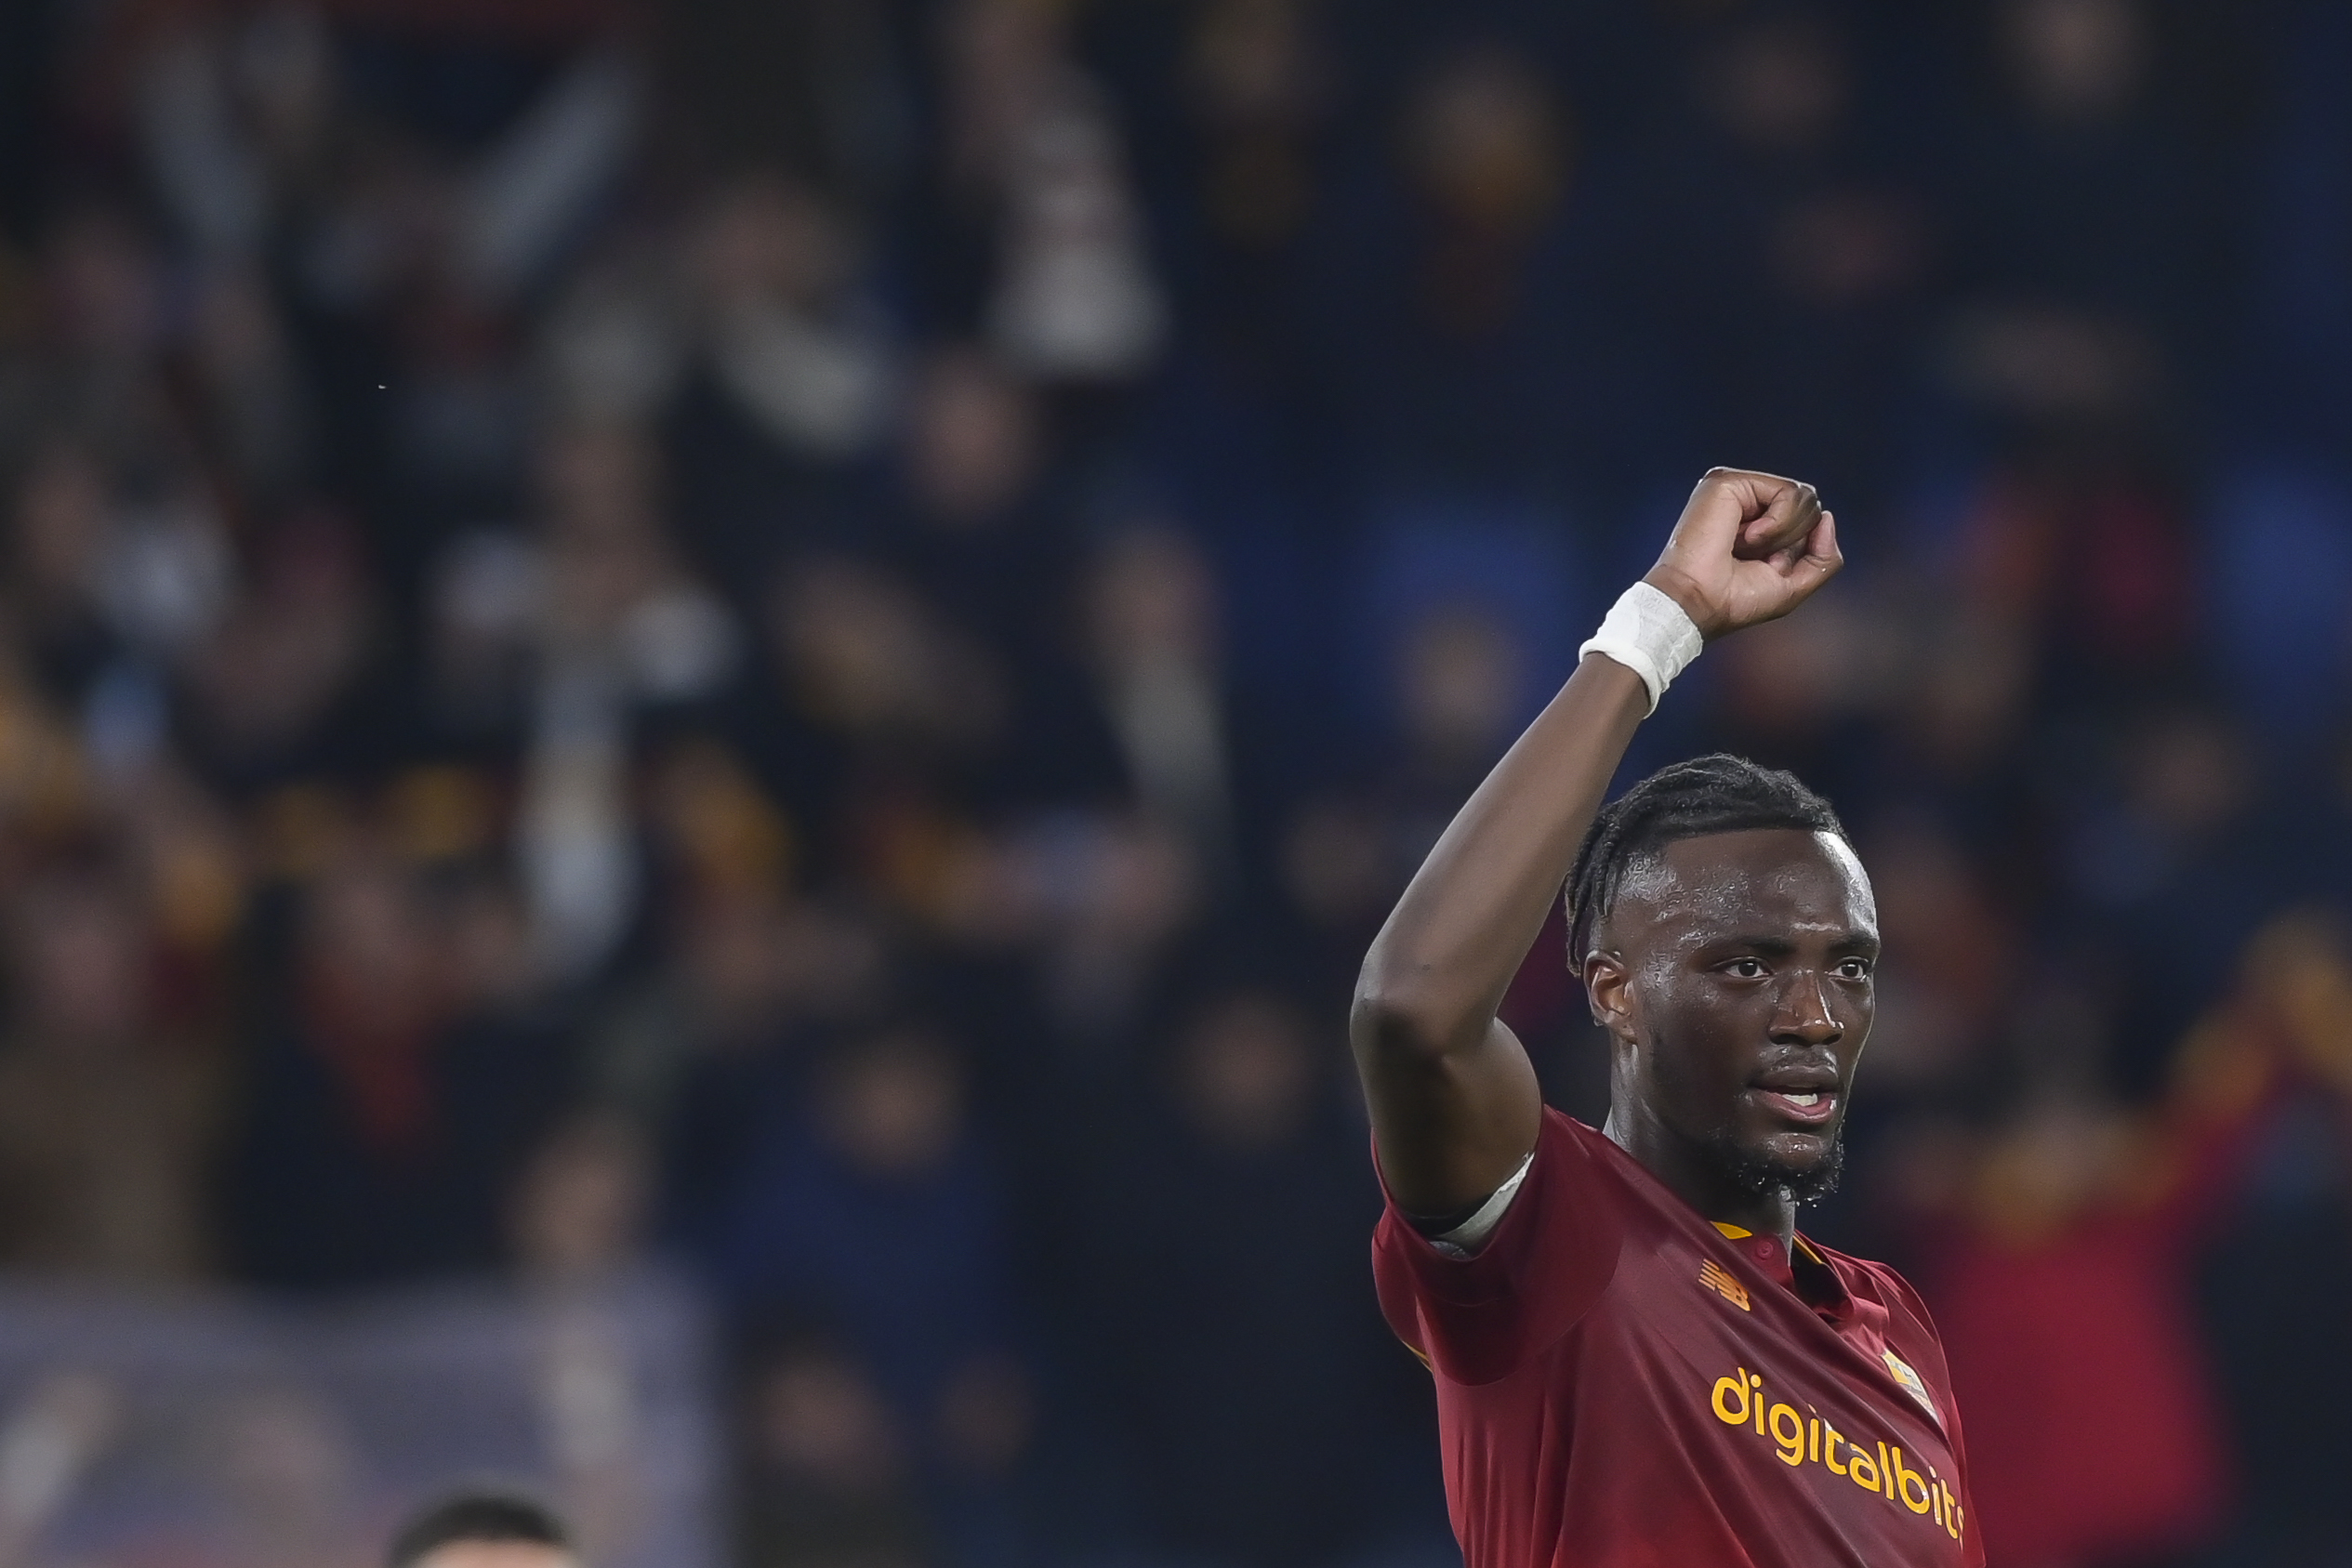 Romelu Lukaku didn’t rise to the occasion as Roma were upended by Inter. The cautious game plan led to a paltry offensive output that impacted him.